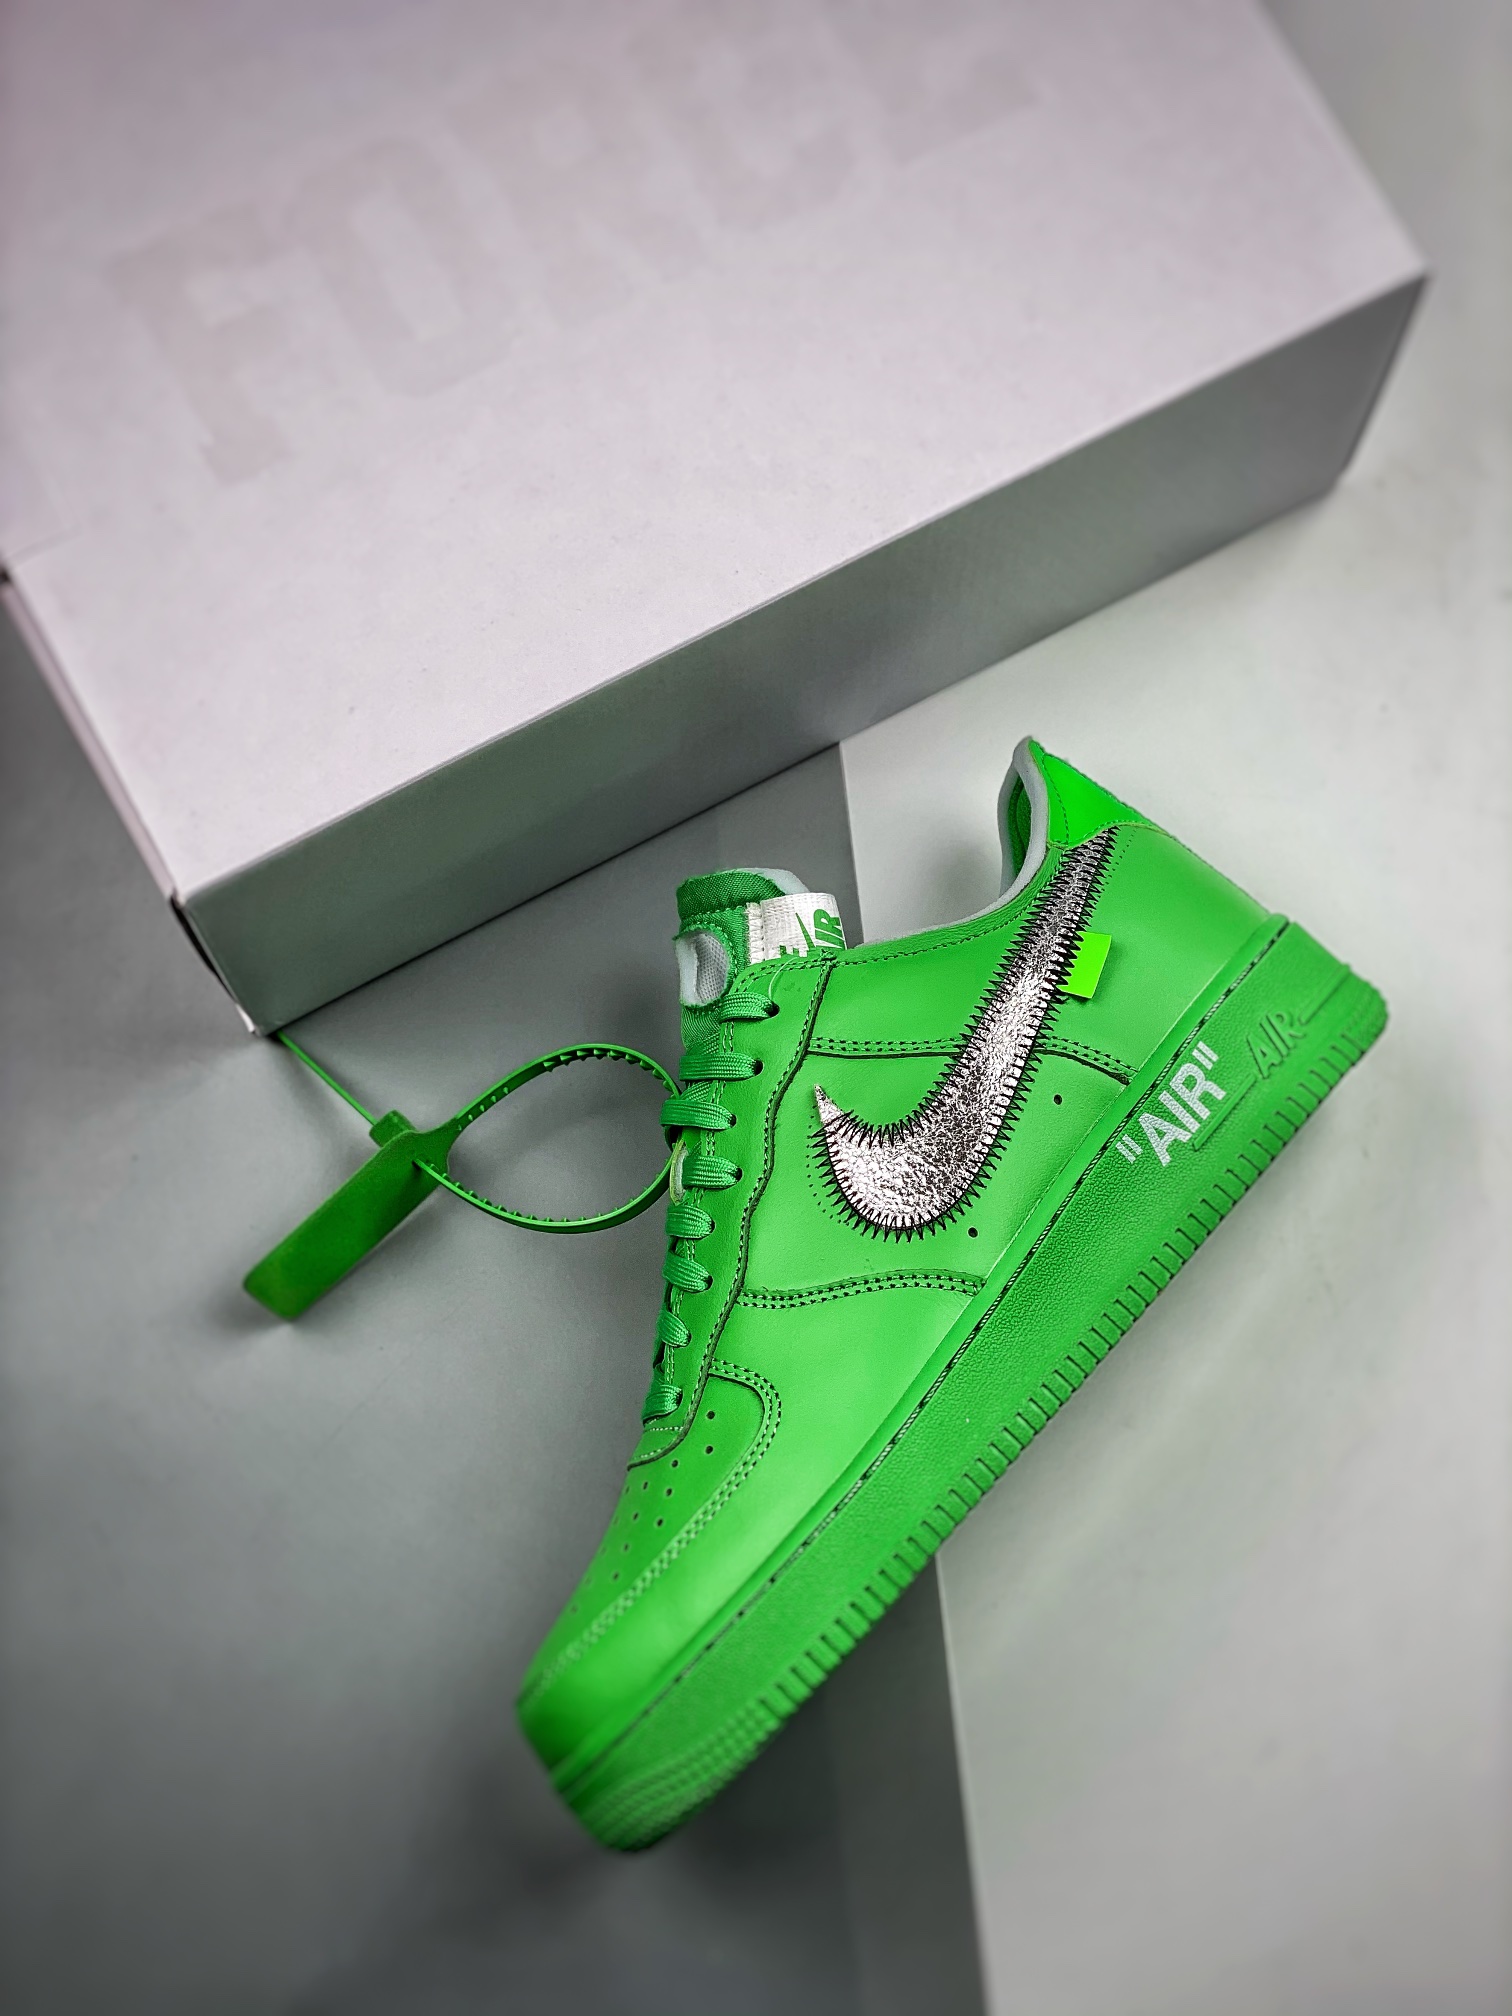 OFF-WHITE x Nike Air Force 1 Light Green Sparkdx1419-300